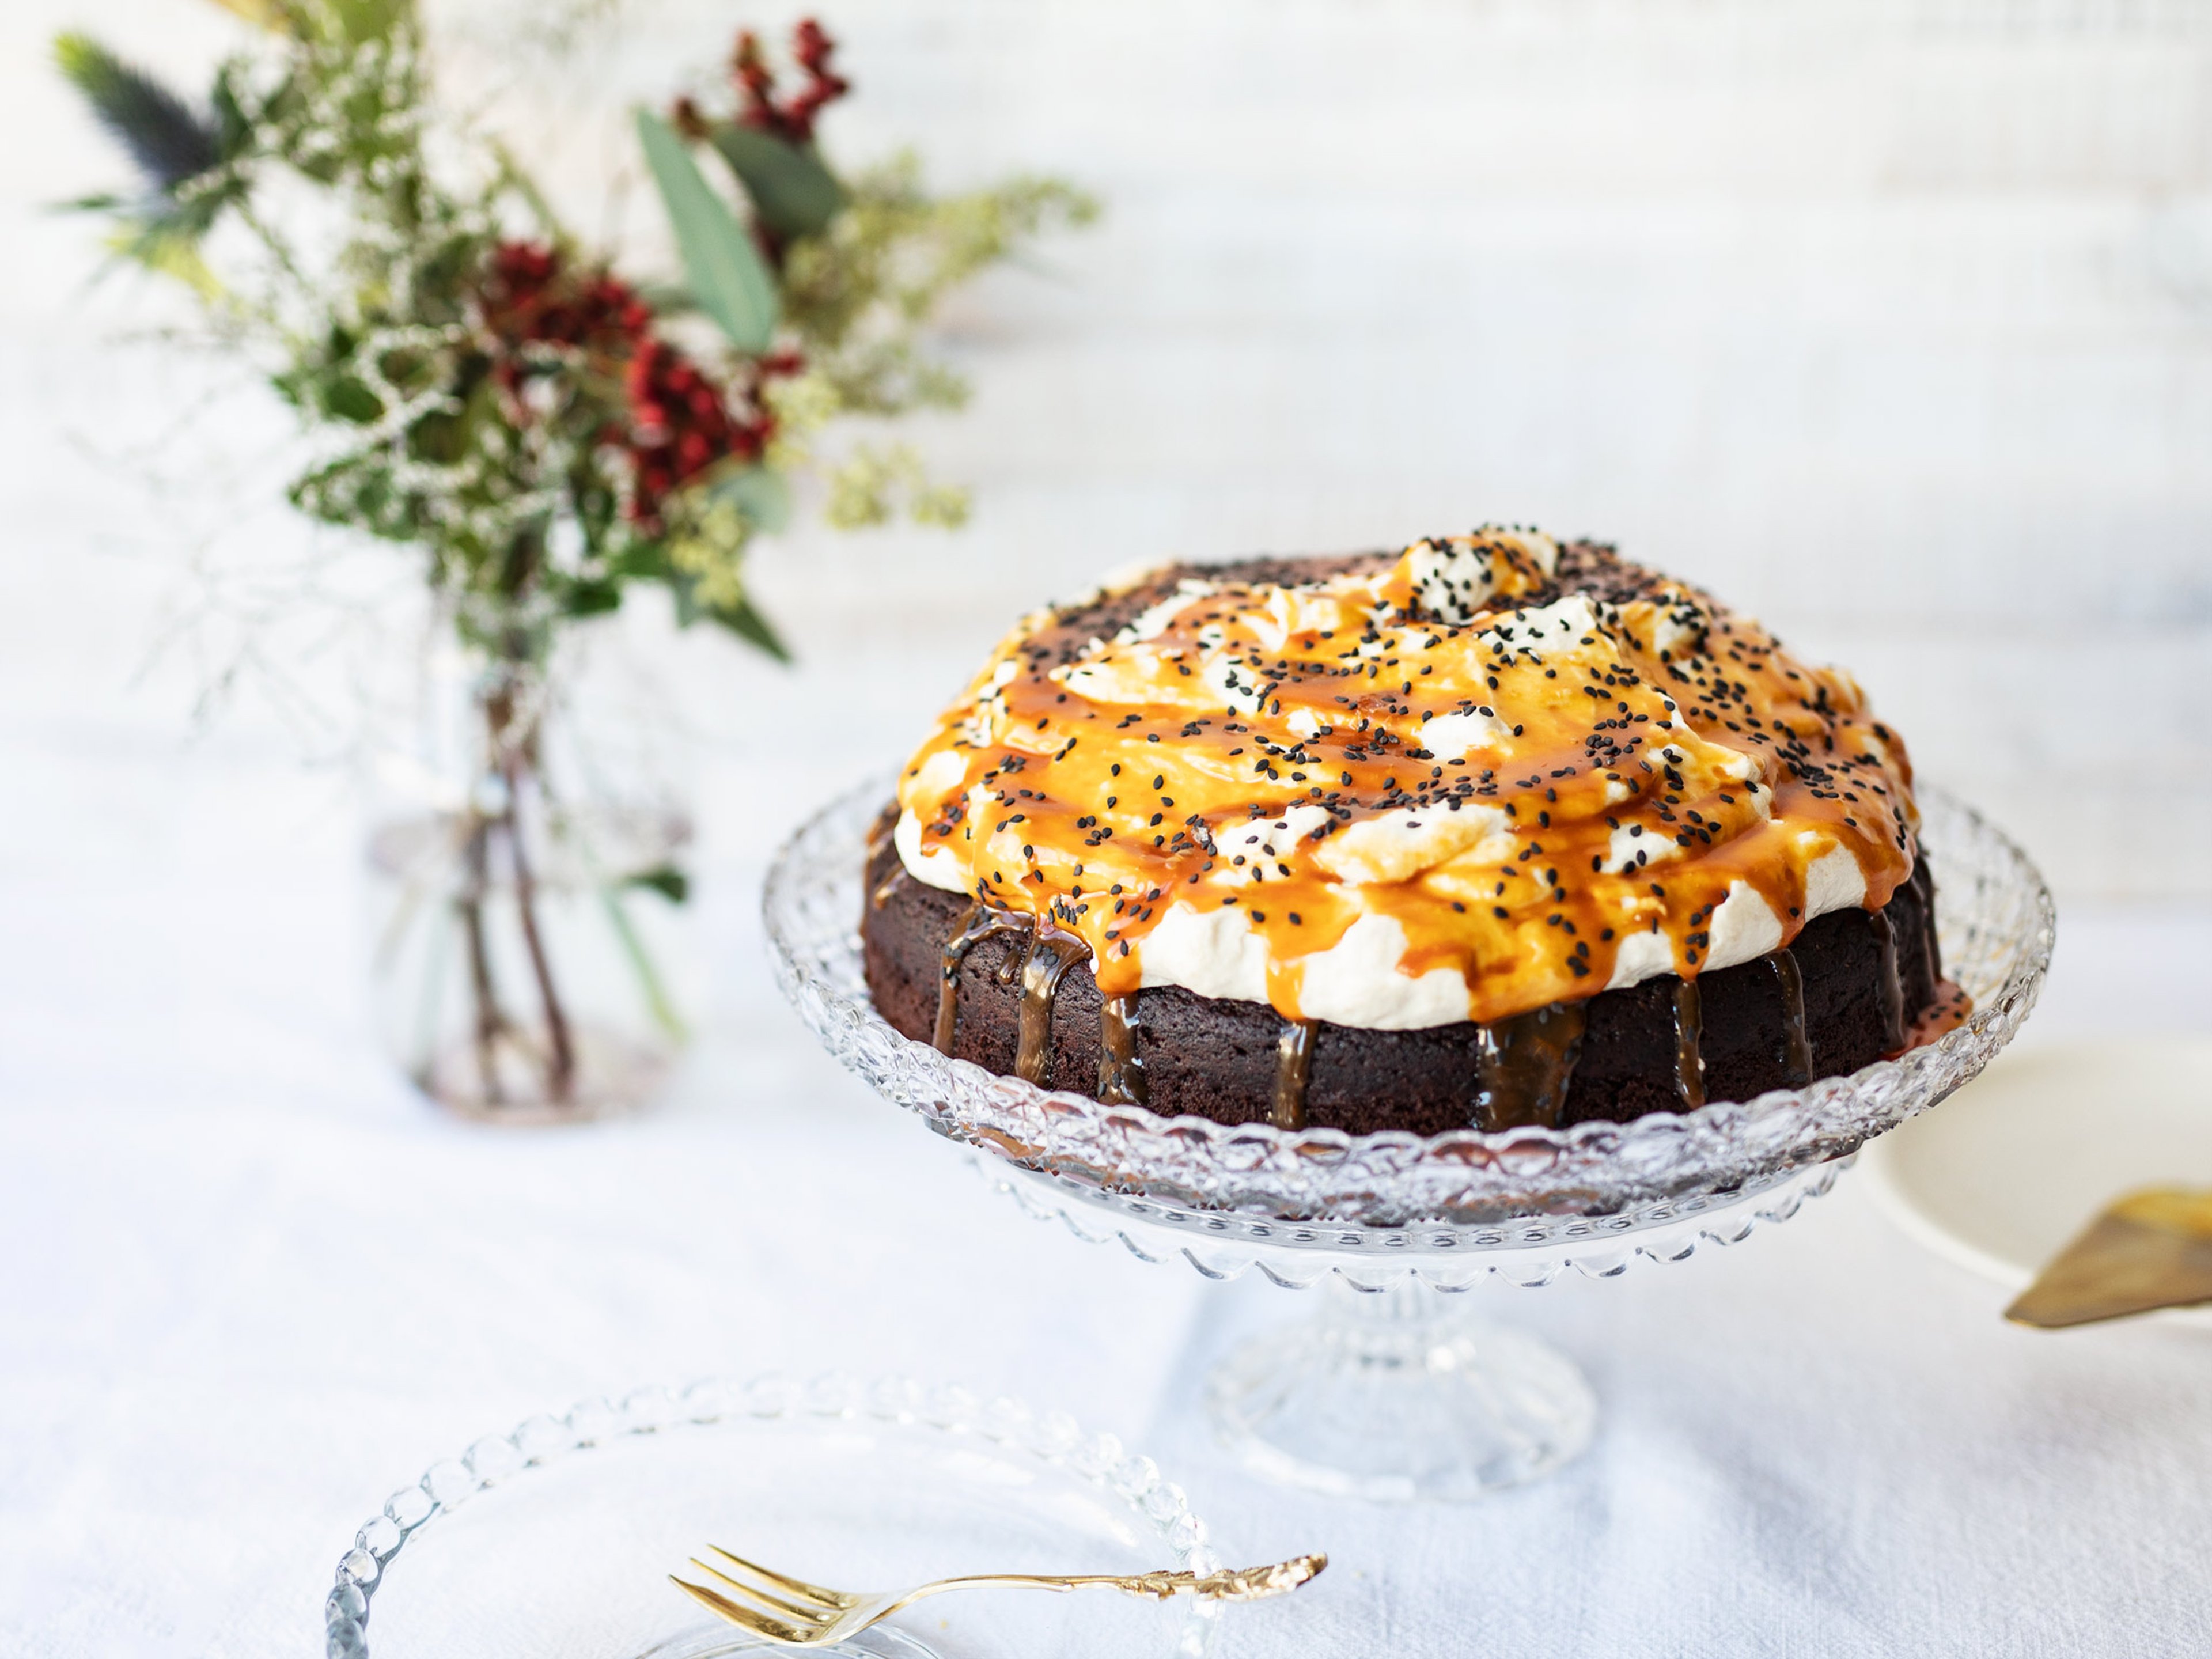 Chocolate cake with fluffy tahini frosting and salted caramel